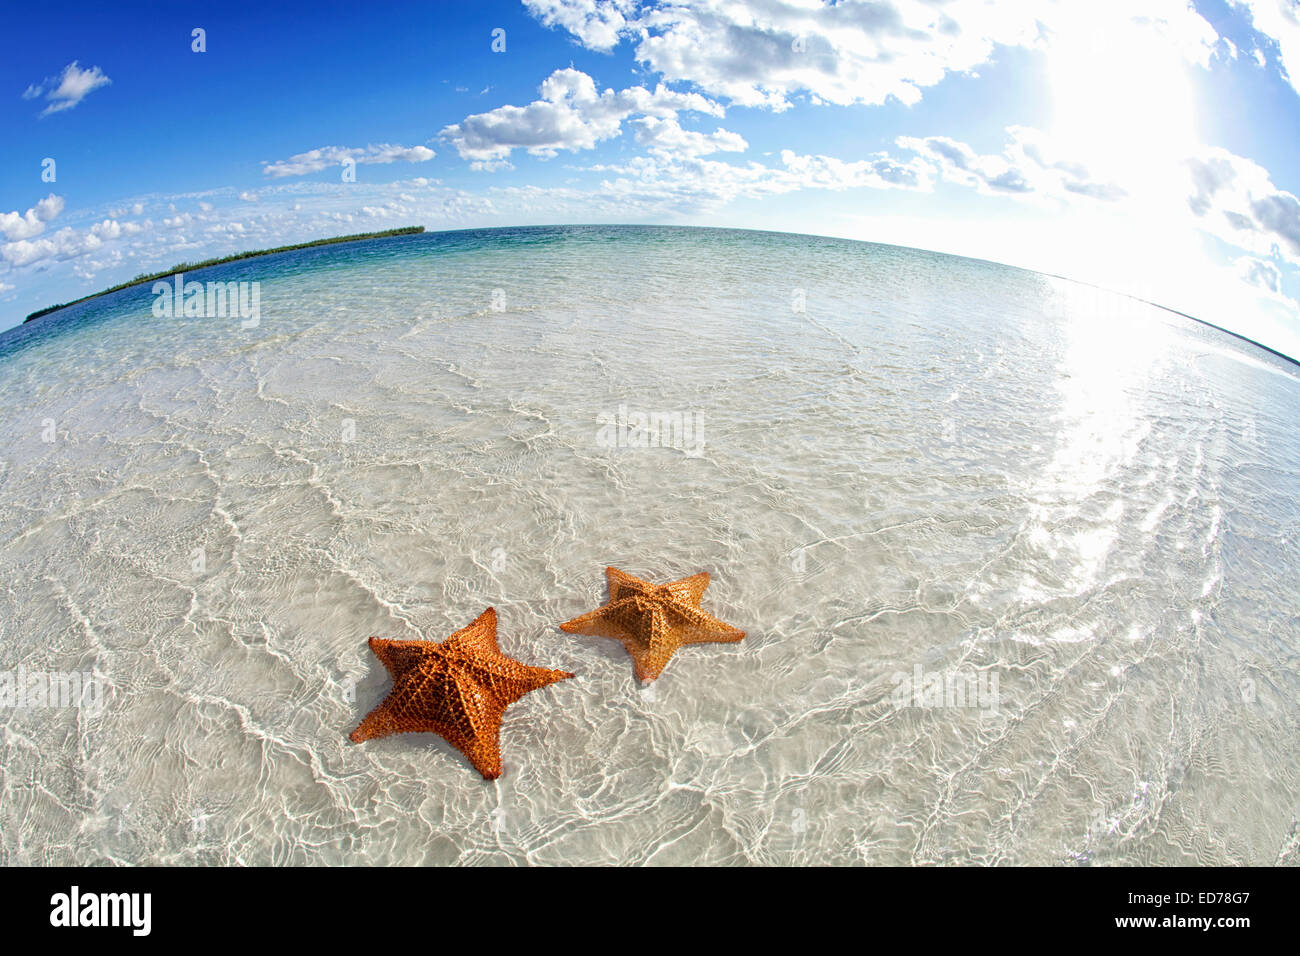 Starfish on tropical beach Banque D'Images